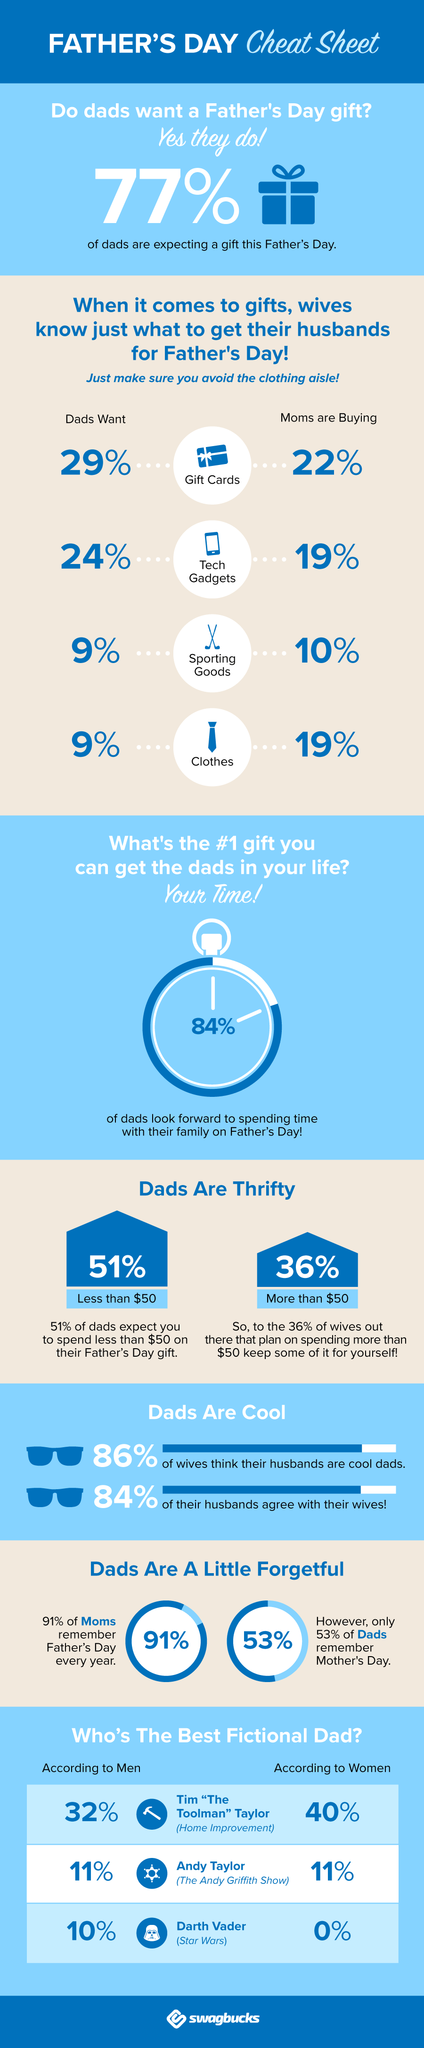 What are you getting Dad for Father's Day? Father's Day Shopping Cheat Sheet